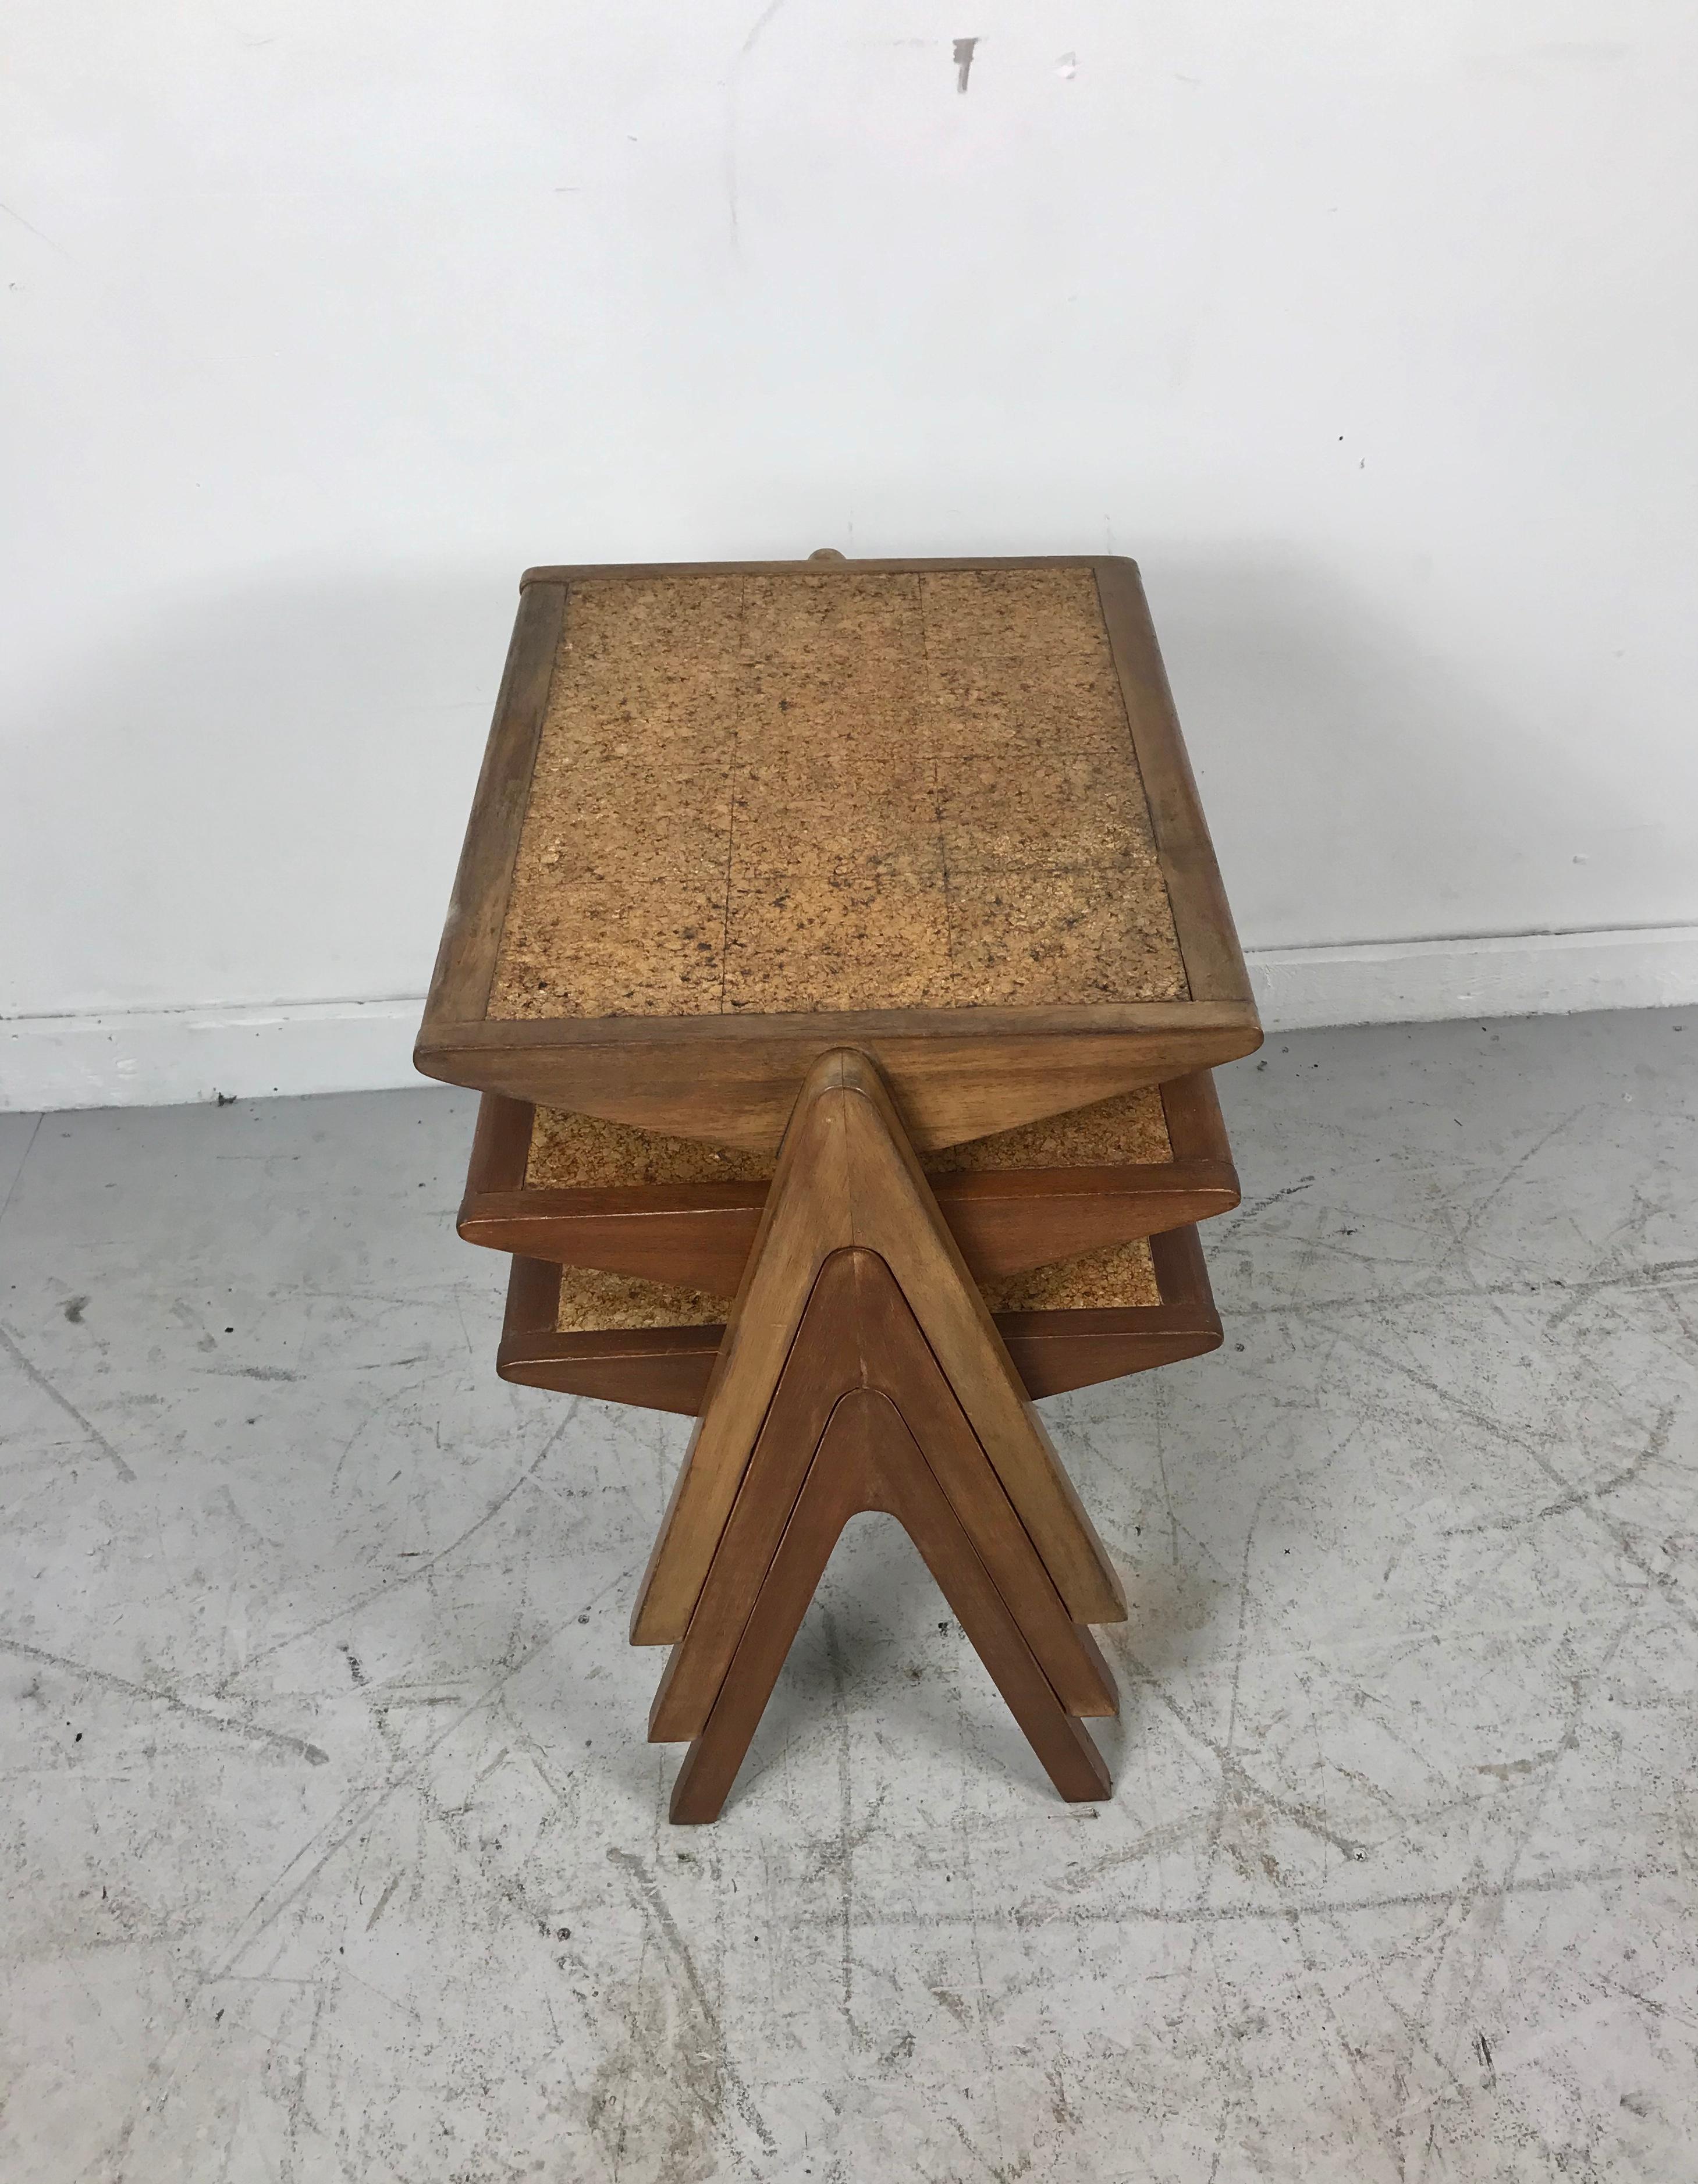 A stylish set of nesting tables designed by Bob Roukema for Jon Jansen in New Zealand, circa 1950s. This stunning set of three nesting tables feature a walnut-stained mahogany frame with its original cork tiled design on rectangular tops and compass